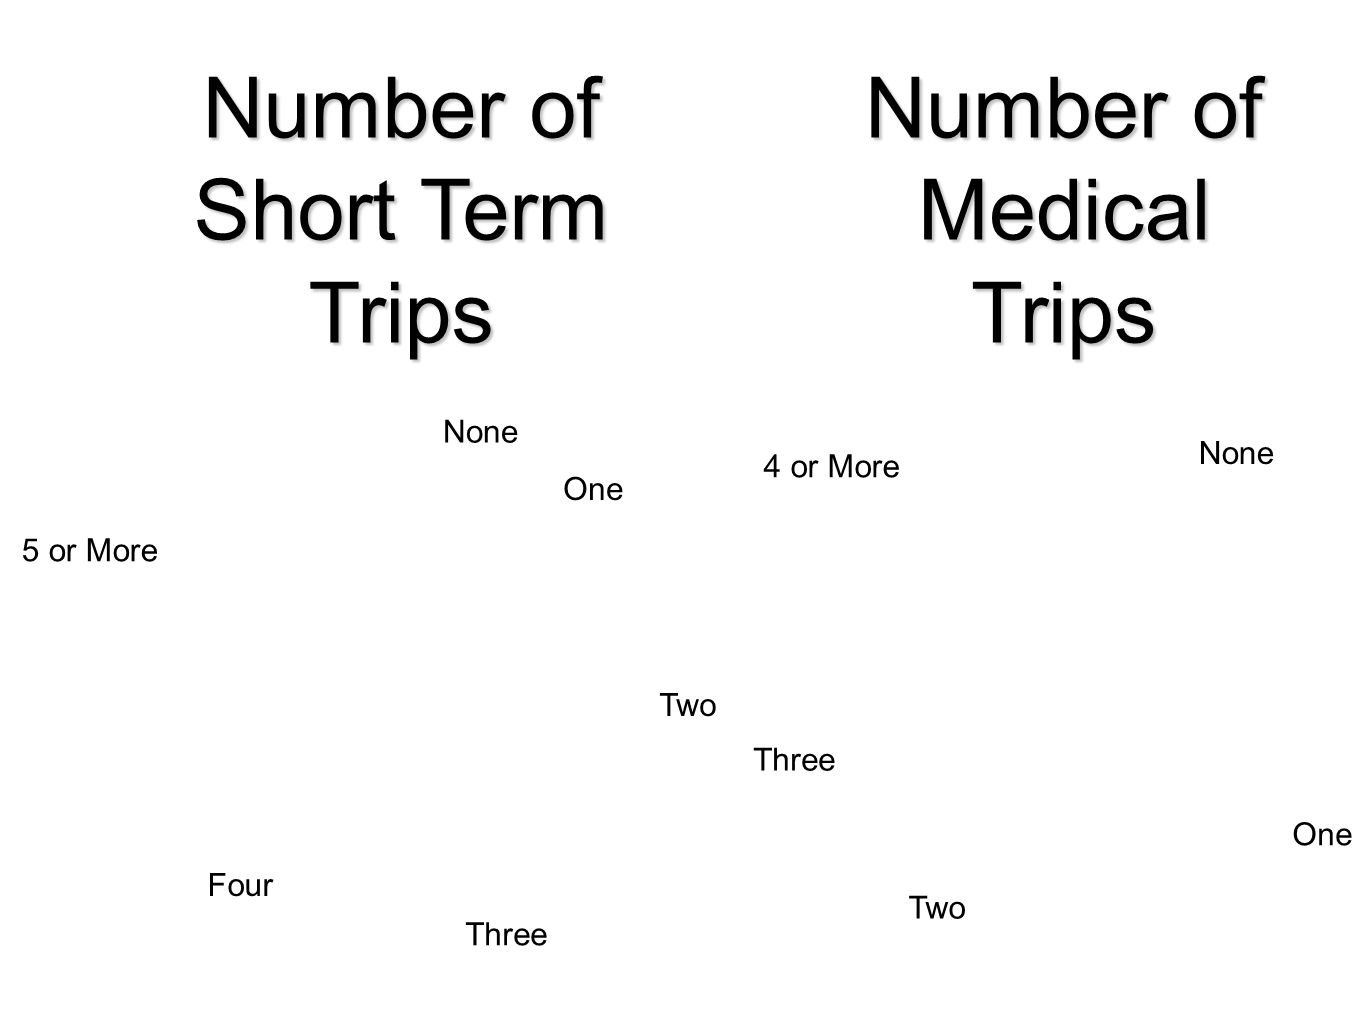 Number of Short Term Trips None One Two Three Four 5 or More Number of Medical Trips None One Two Three 4 or More